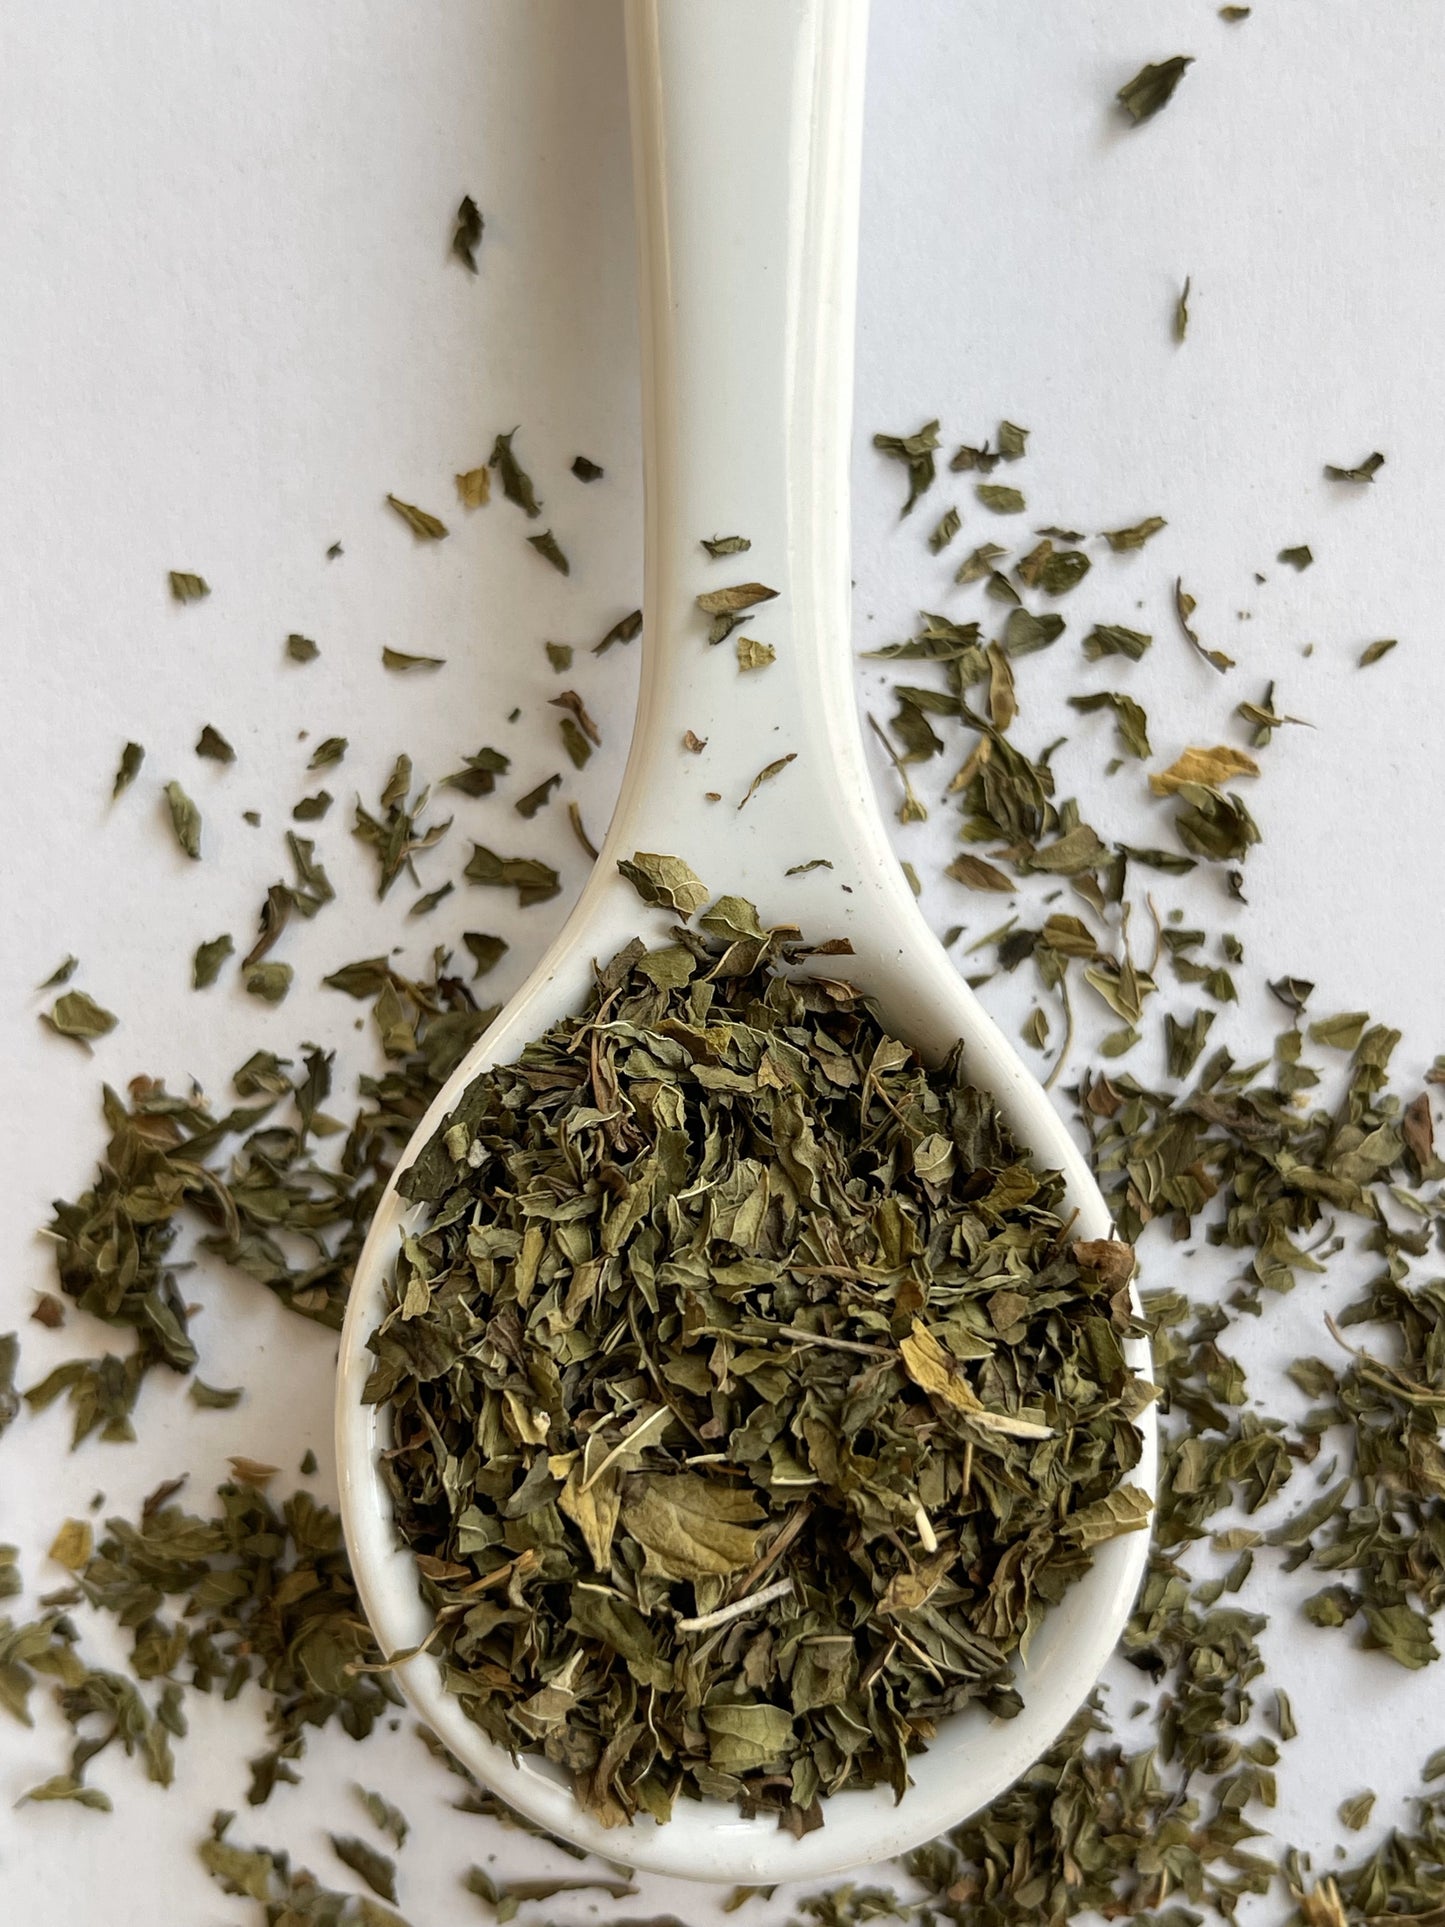 Herbal tea blend blend of peppermint and spearmint leaves